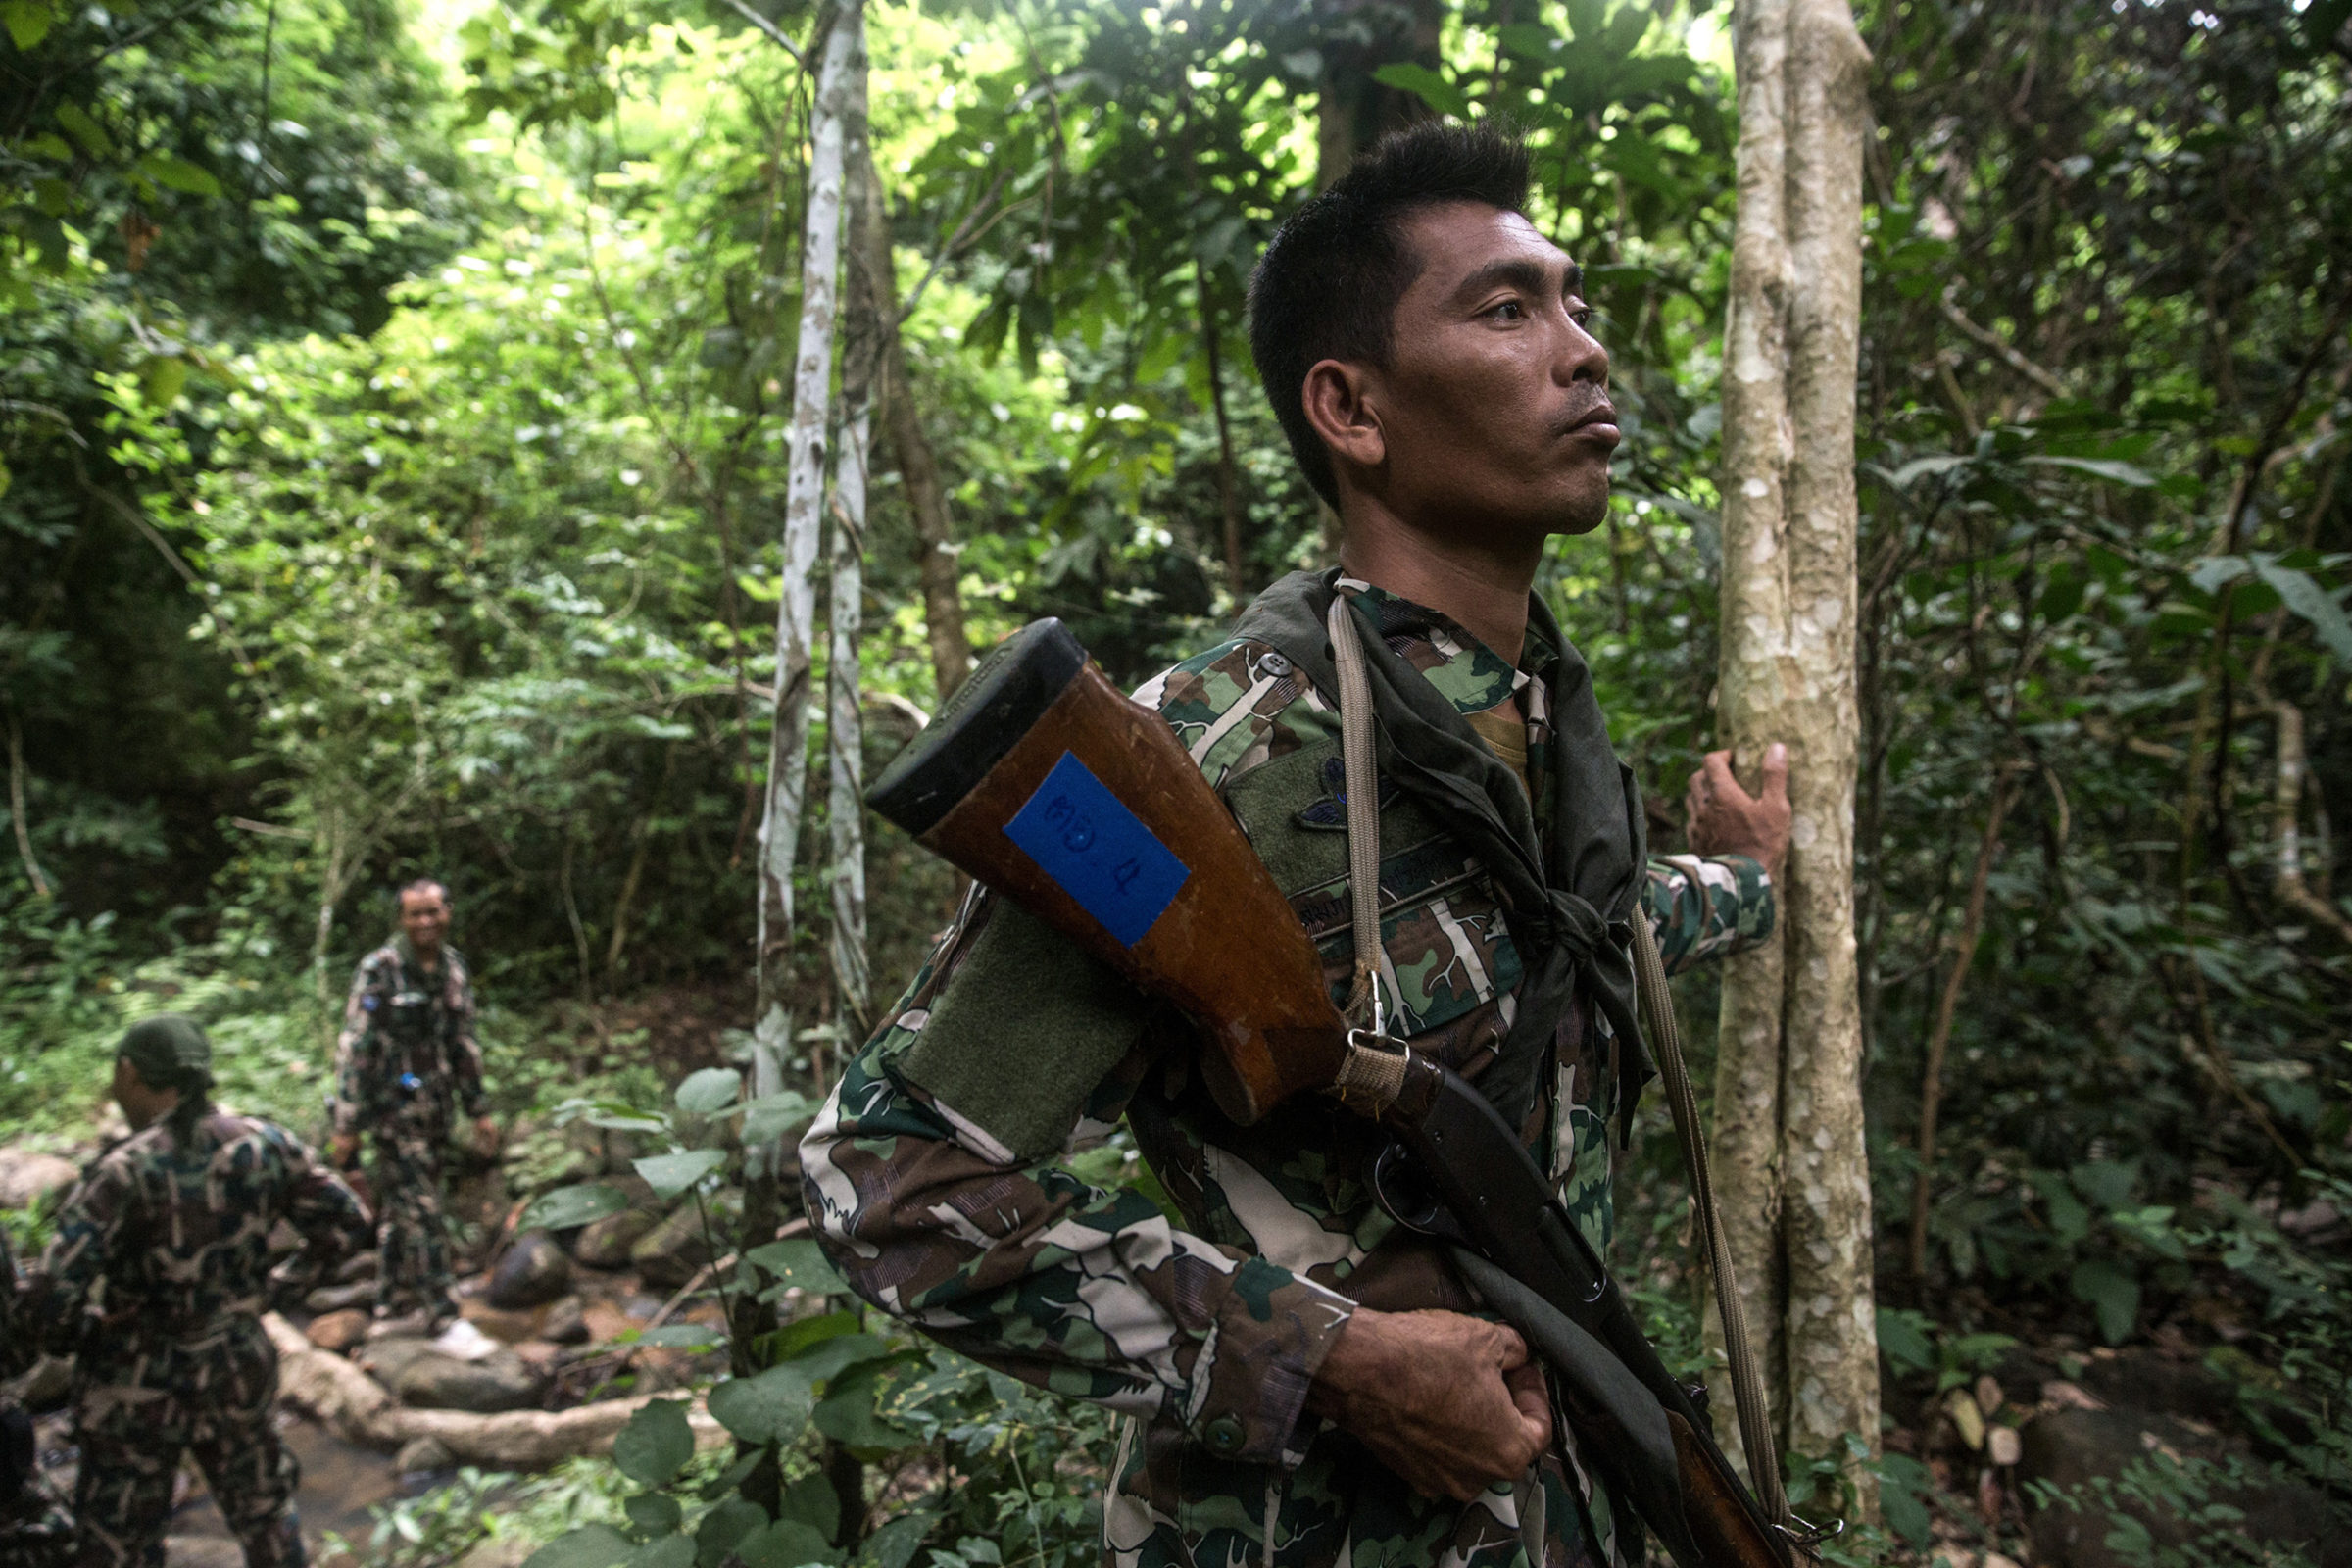 Crack teams of forest rangers patrol Thailand’s Ta Phraya National Park, part of a protracted, bloody struggle to prevent the illegal logging and trafficking of Siamese rosewood. Photo: Luke Duggleby